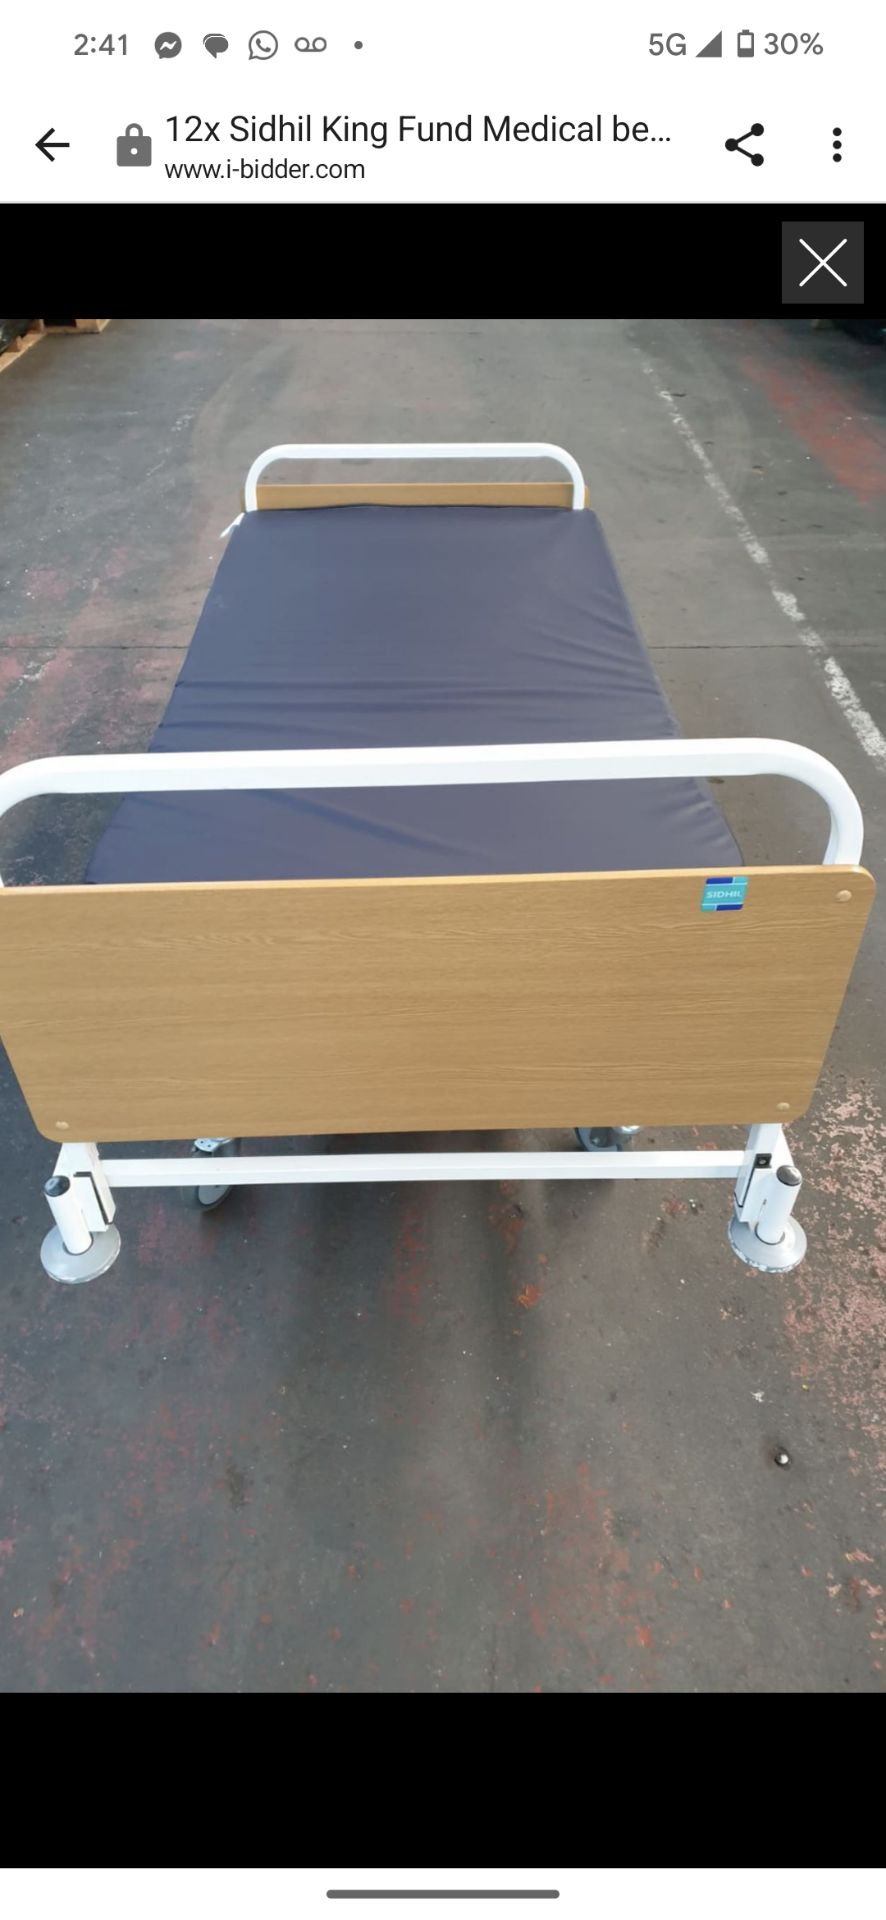 1 x Sidhil Kings Fund Hydraulic Hospital Bed With Mattress - Image 2 of 4